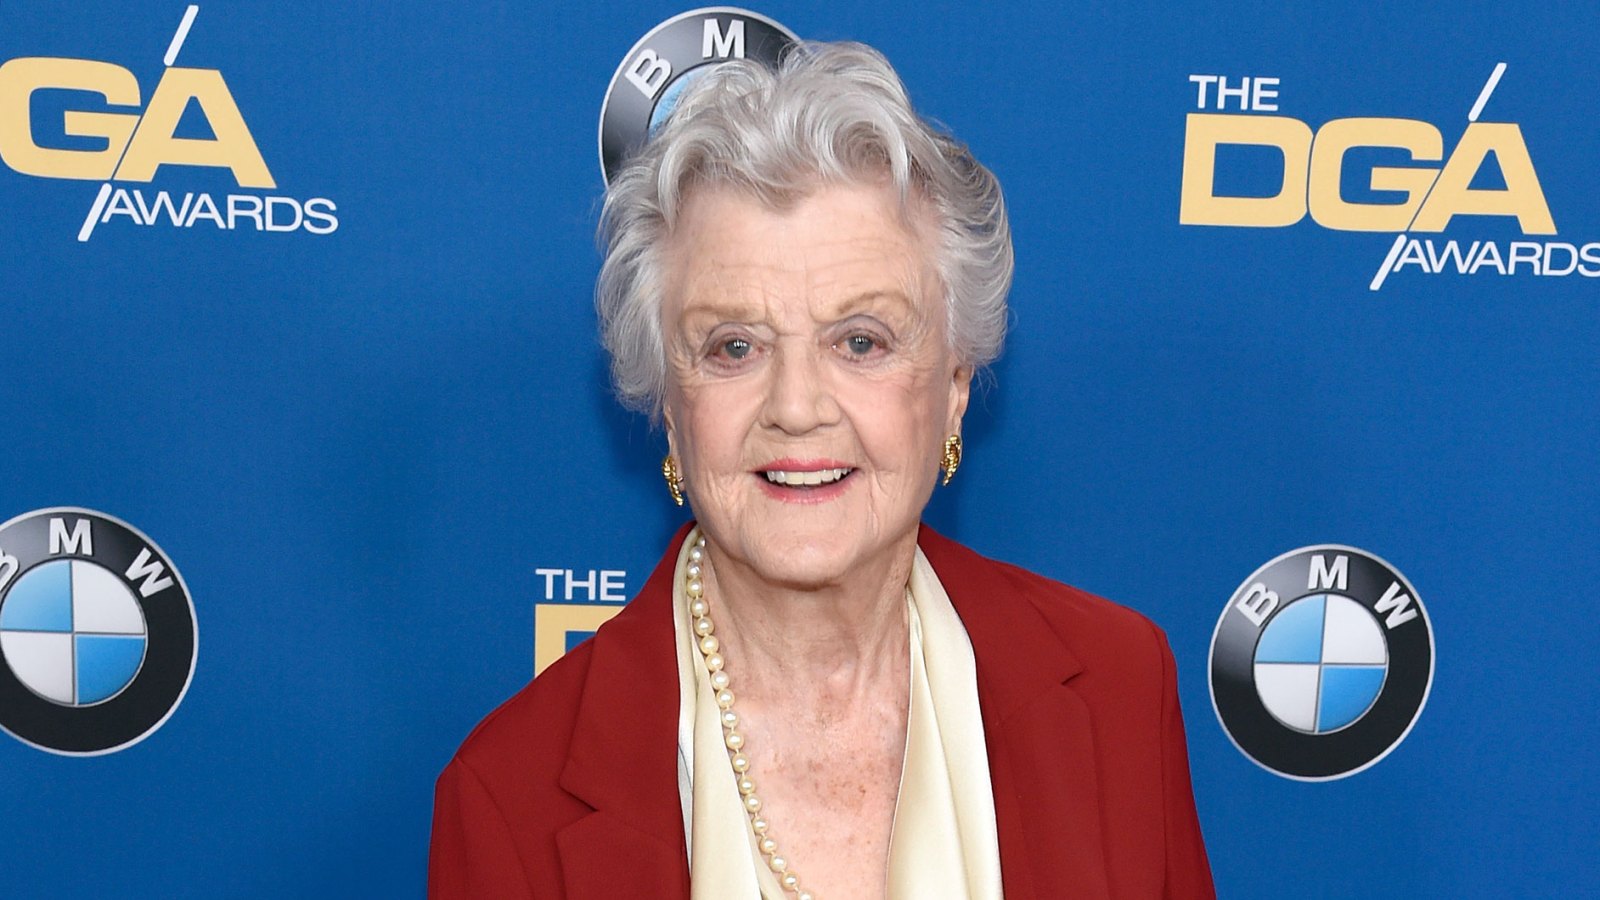 Murder She Wrote Star and Broadway Legend Angela Lansbury Dies at 96